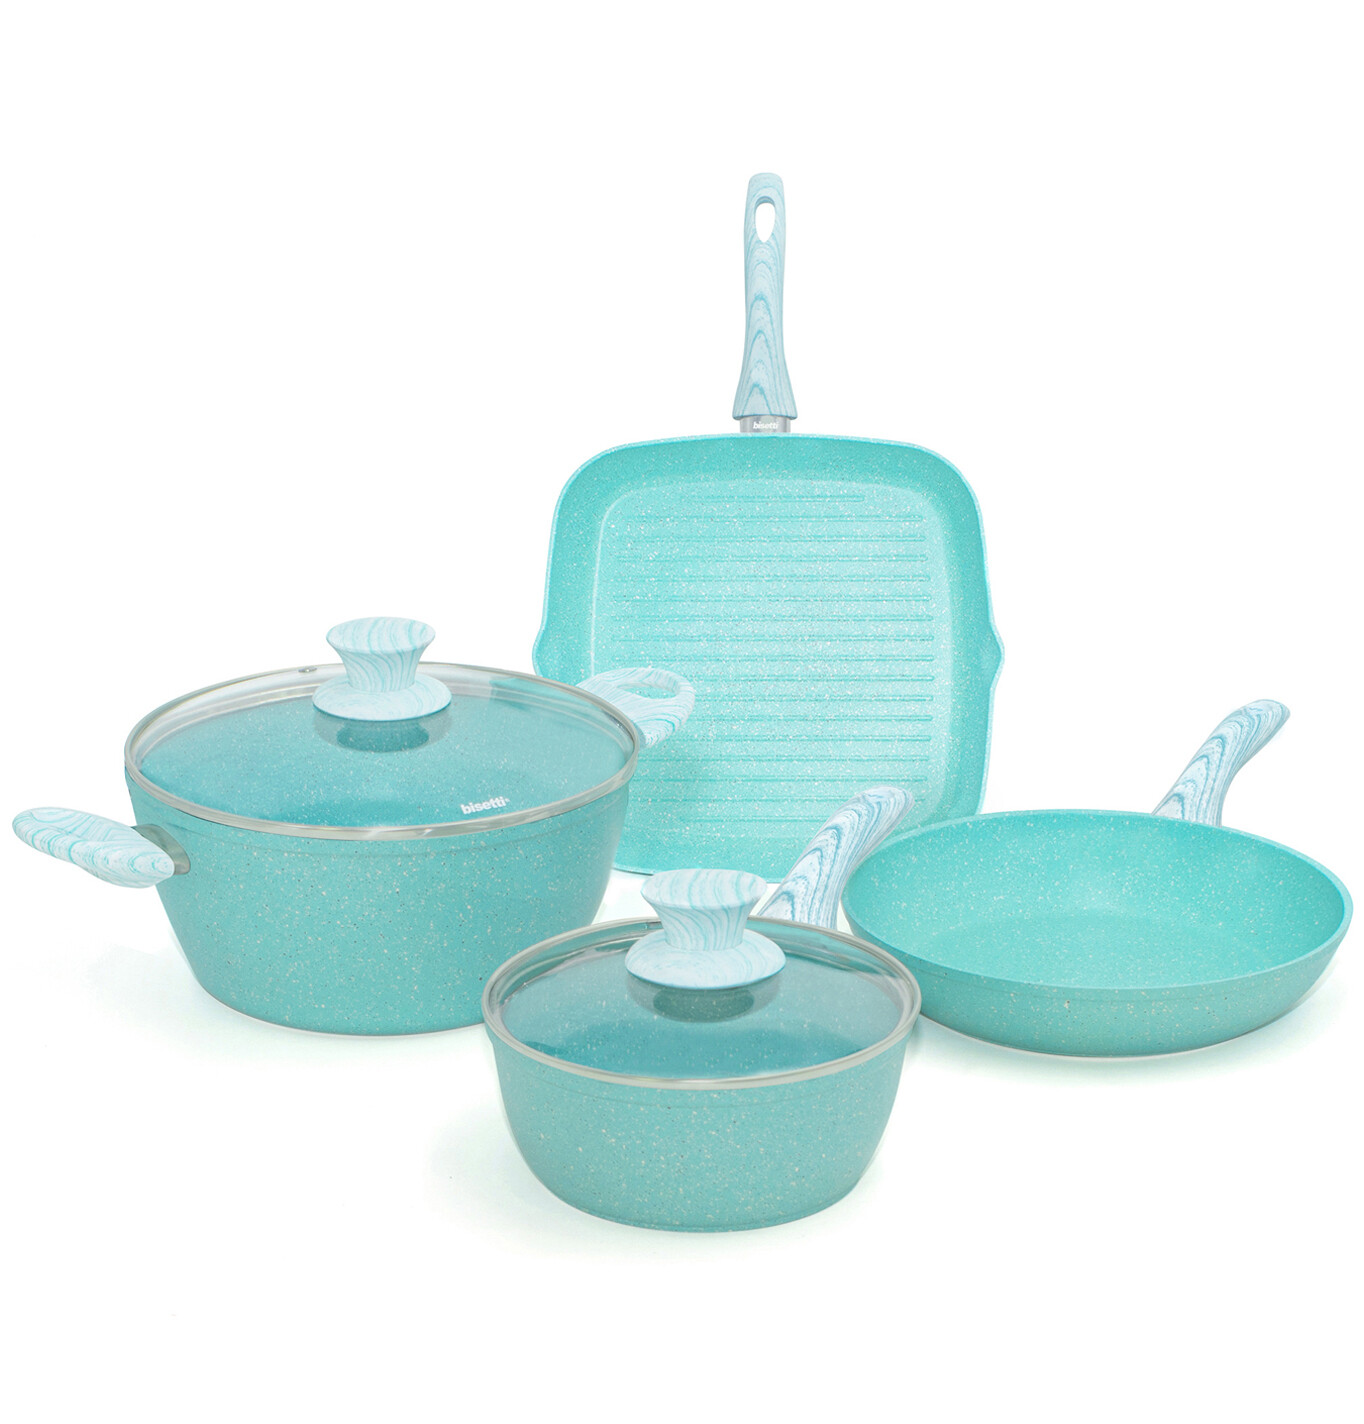 6 pieces cookware set 'Miss Gourmet' with turquoise wood colour handles